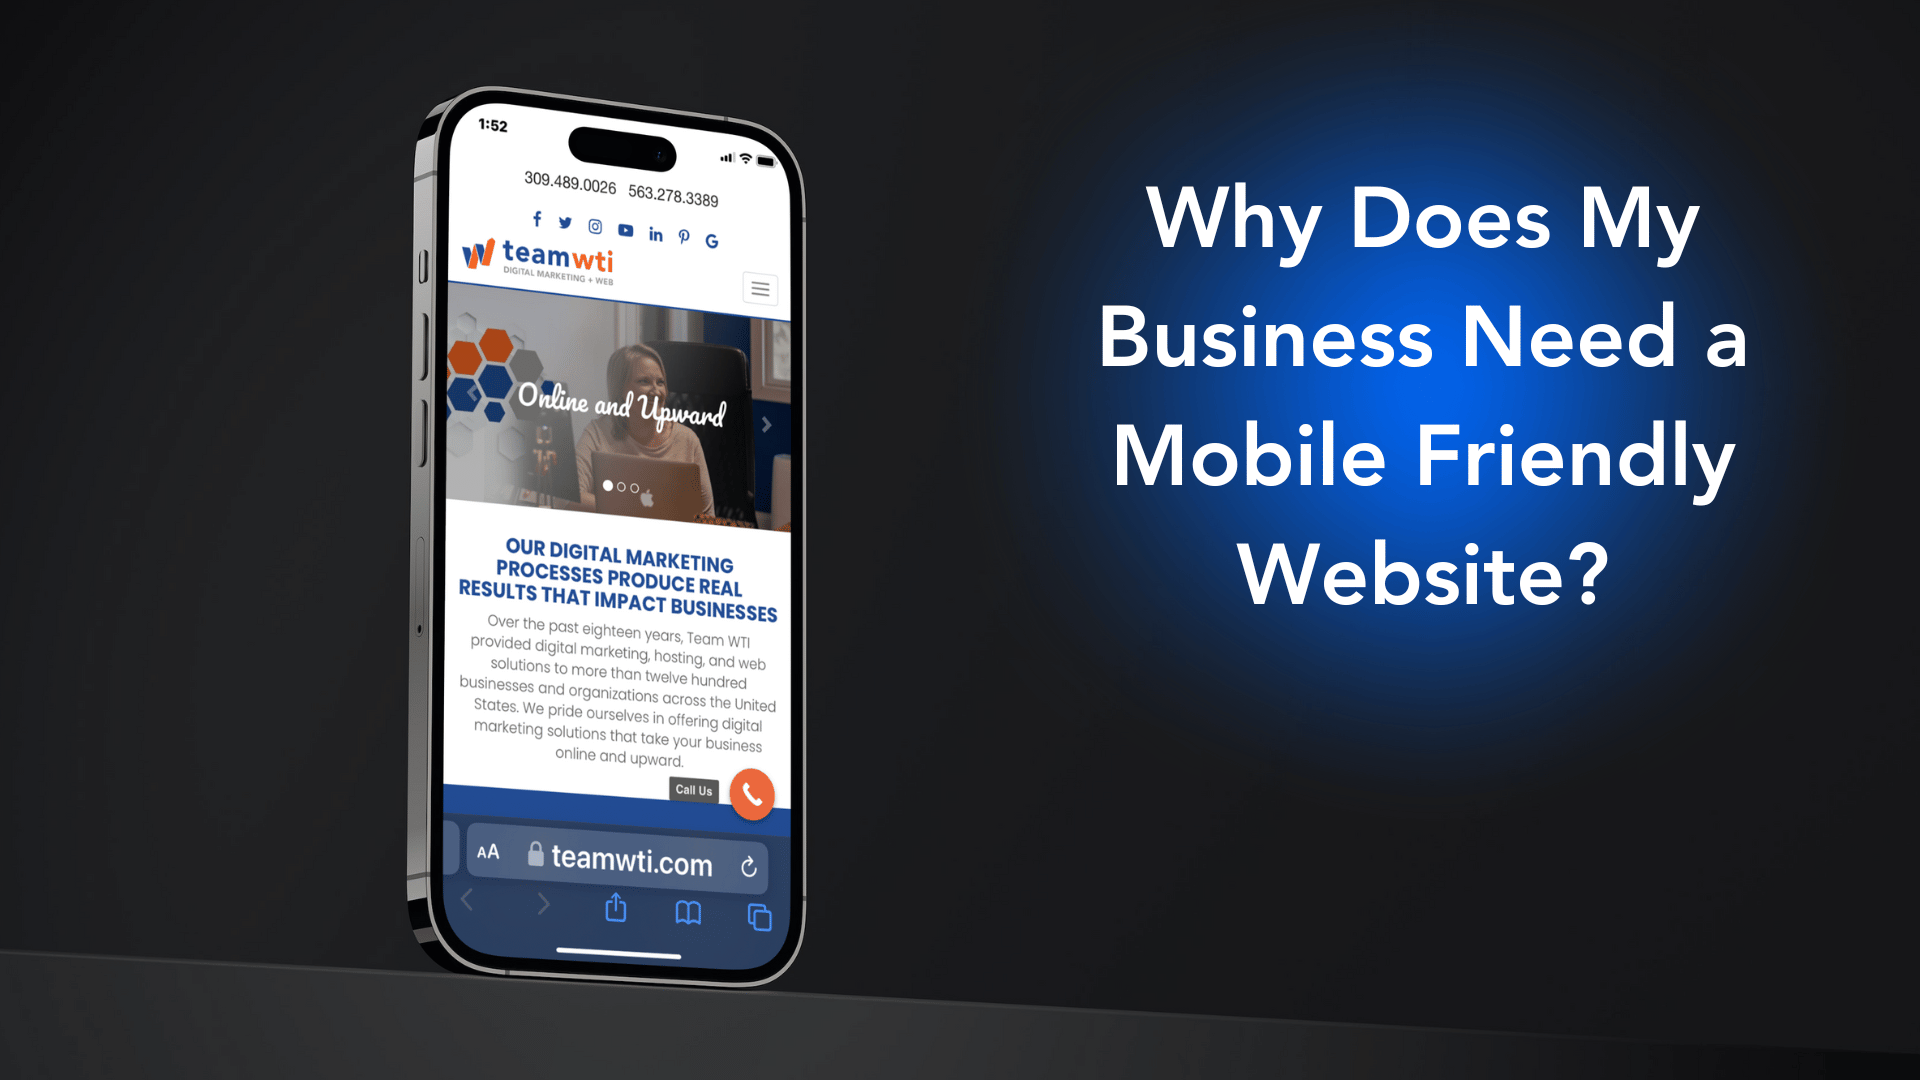 Why Does My Business Need a Mobile Friendly Website?